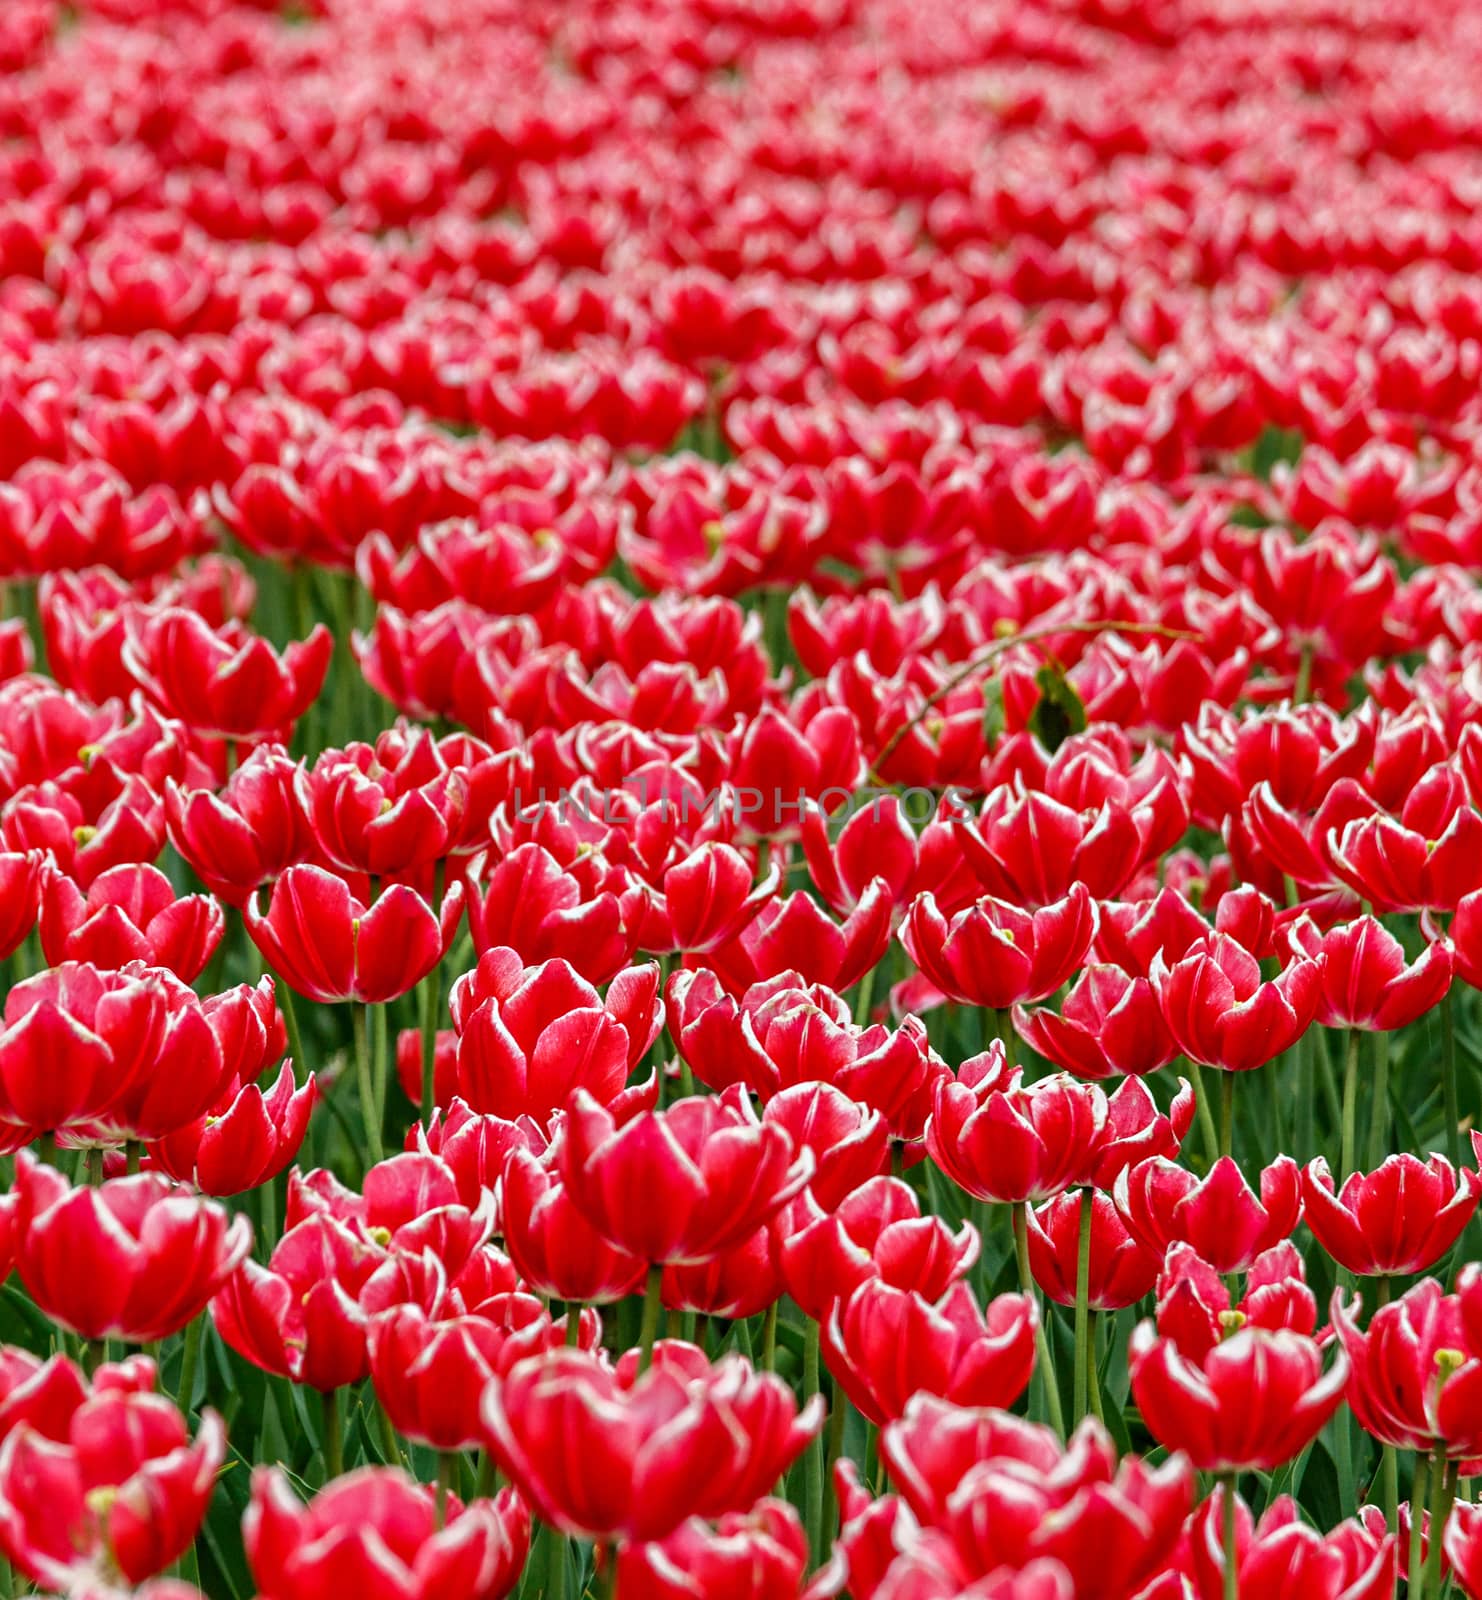 Field of red tulips
